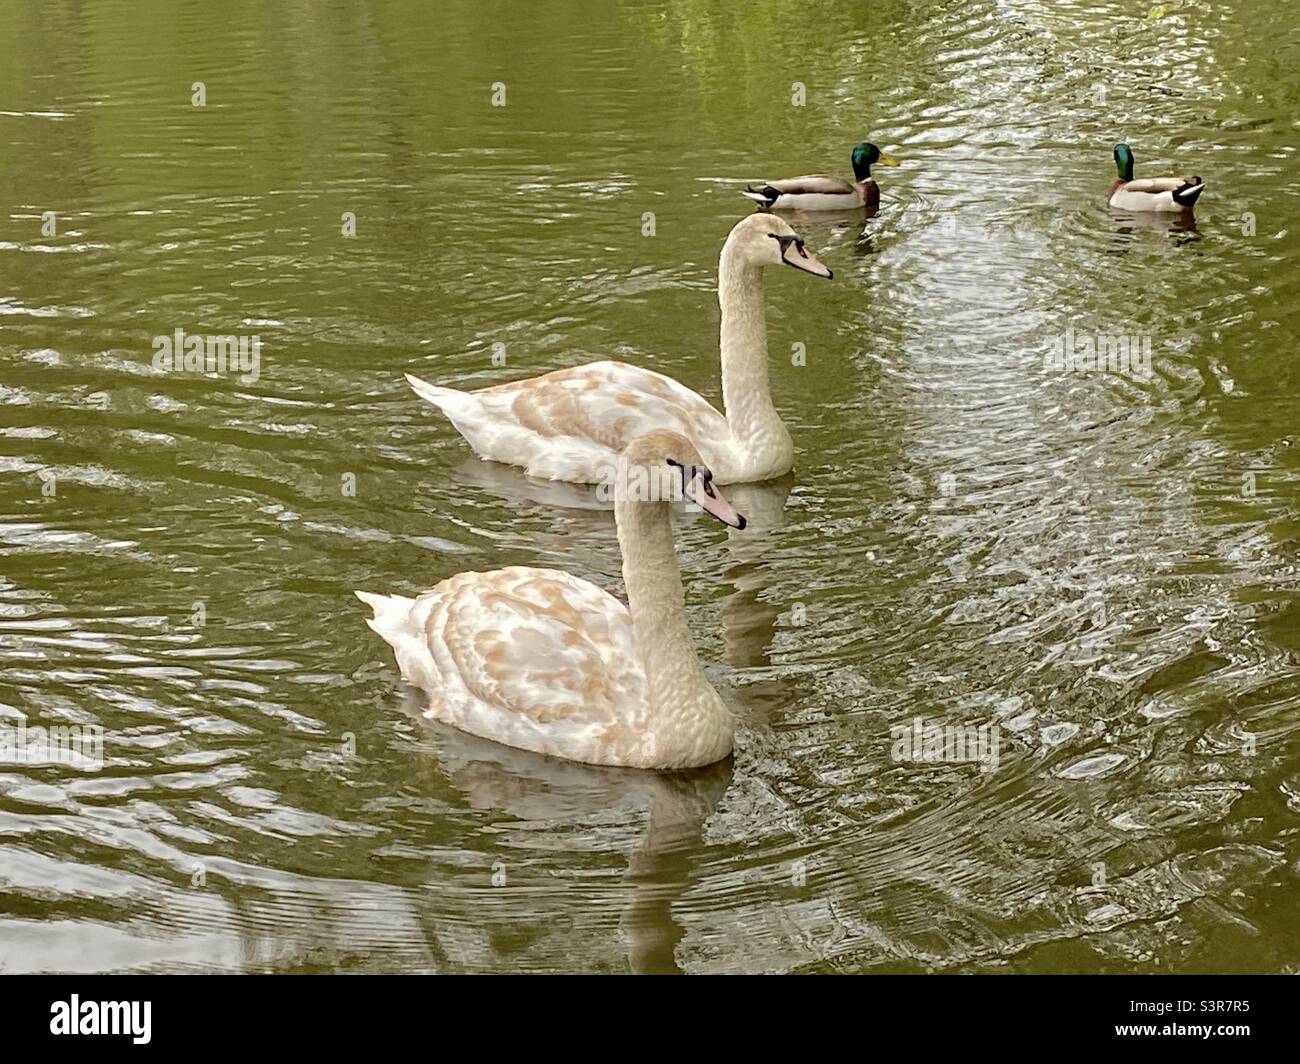 Two young swans swimming on a lake Stock Photo